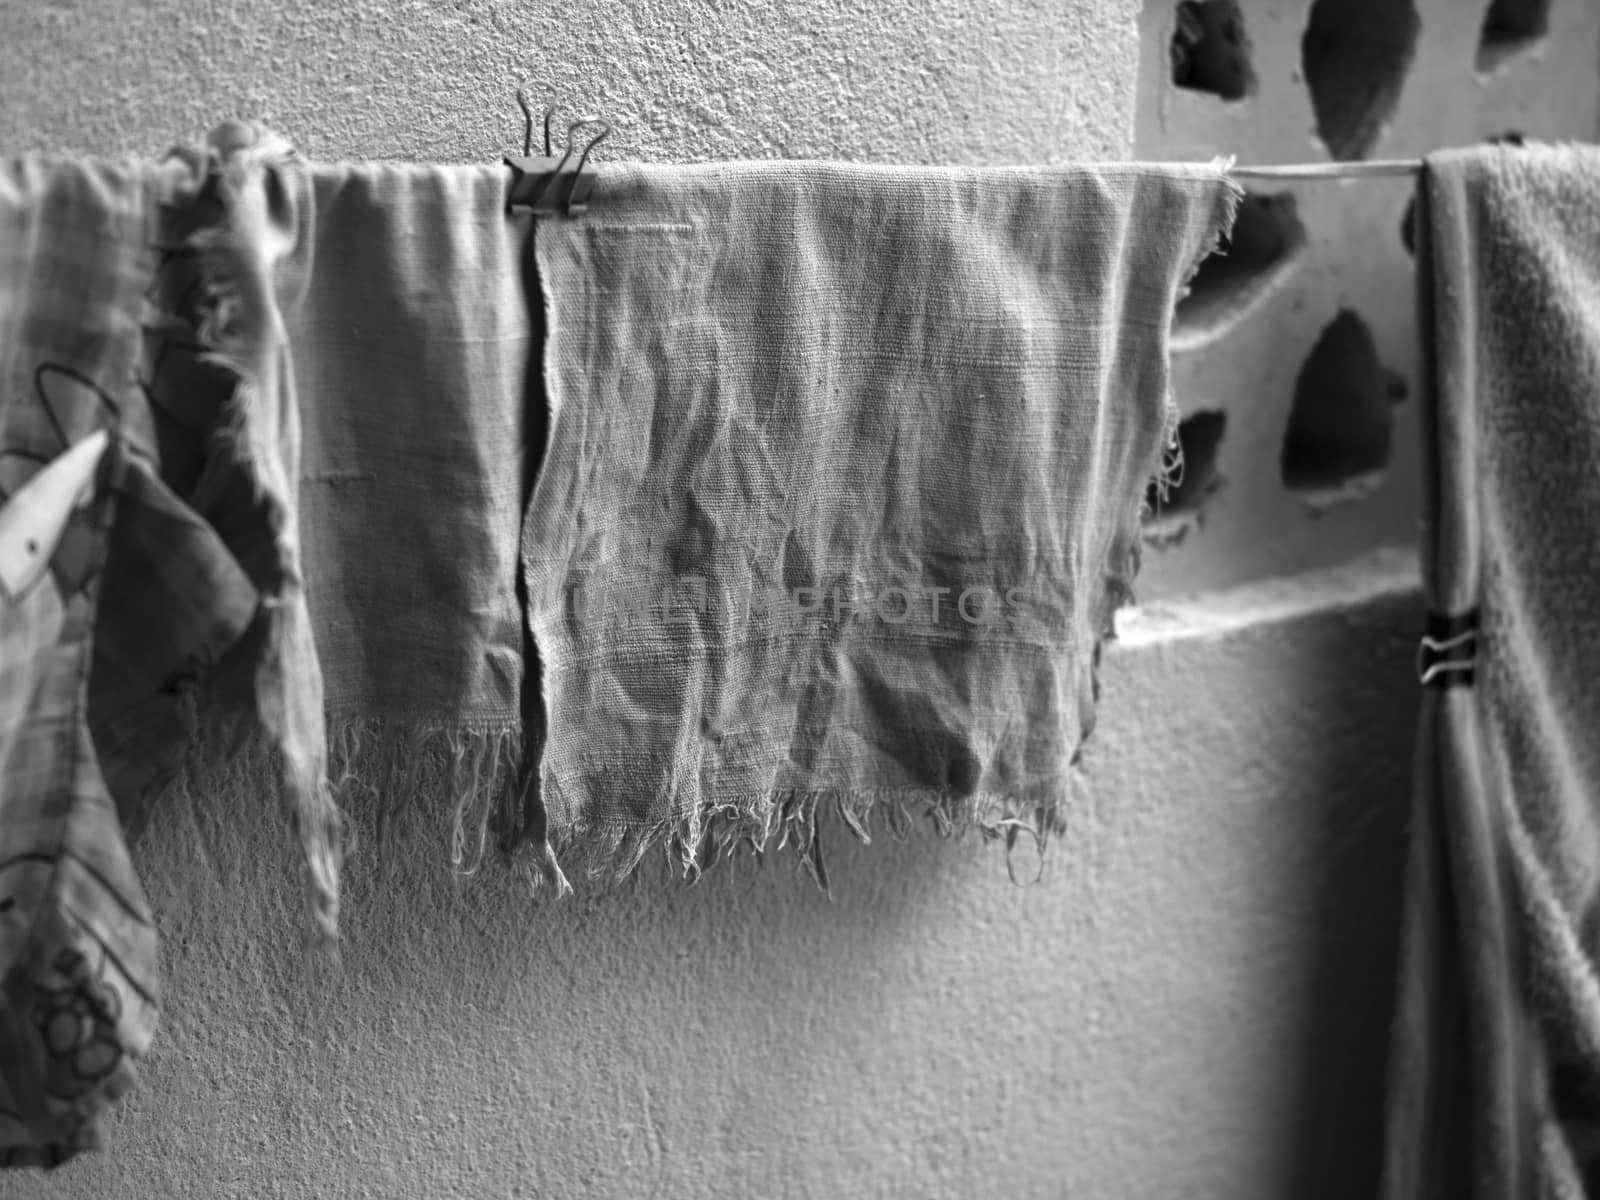 OLD AND FADED HANDKERCHIEF DRYING OUTSIDE by PrettyTG